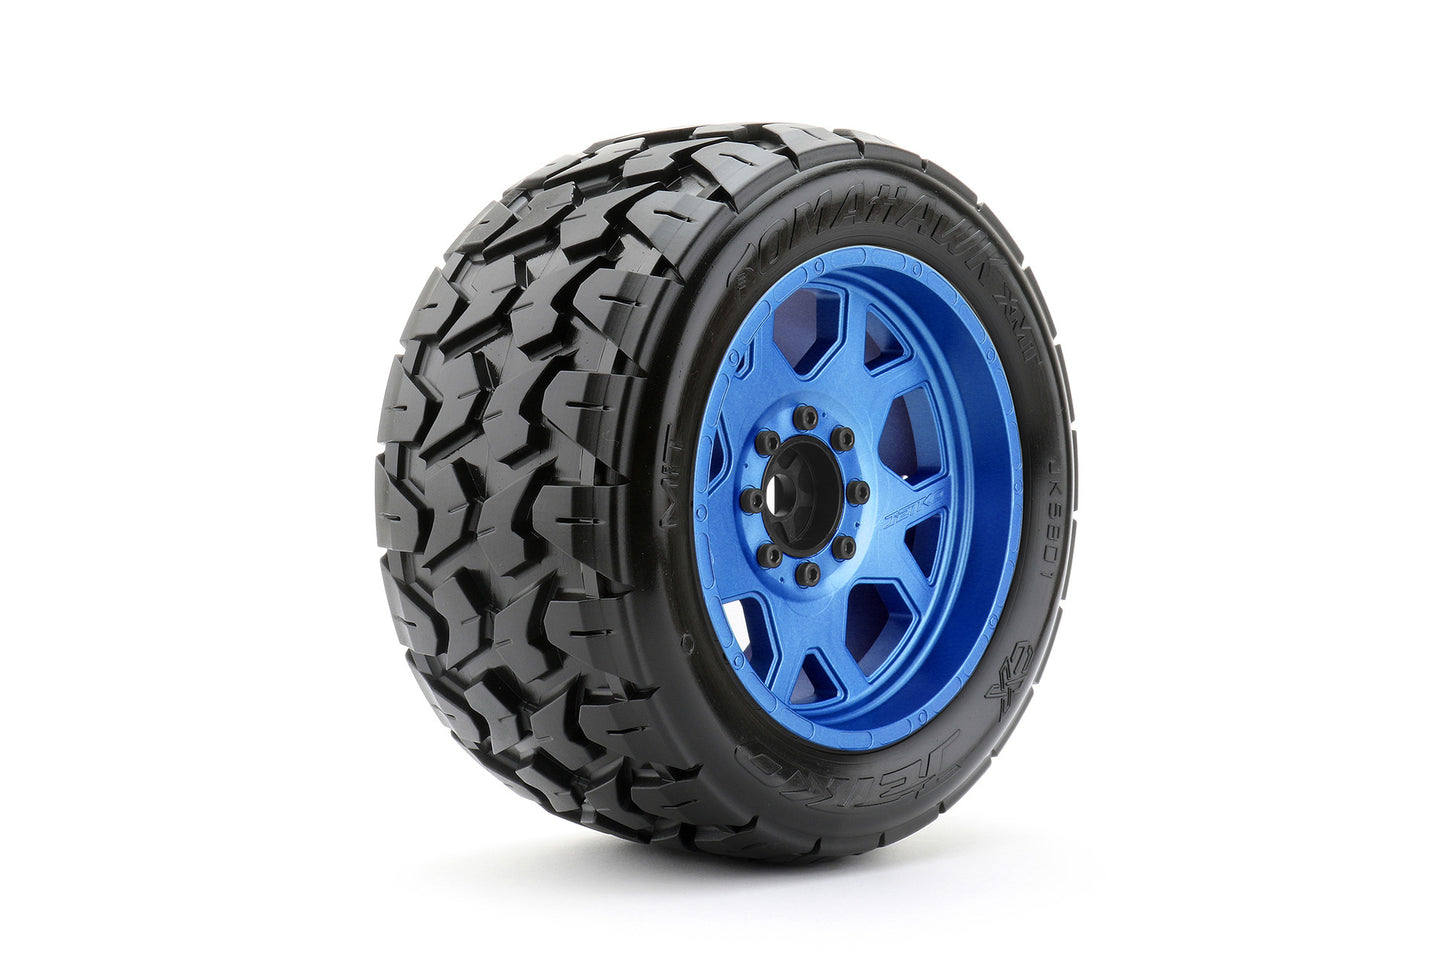 1/5 XMT EX- Tomahawk Tires Mounted on Metal Claw Rims, Medium Soft, Belted, 24mm, for Traxxas X-Maxx